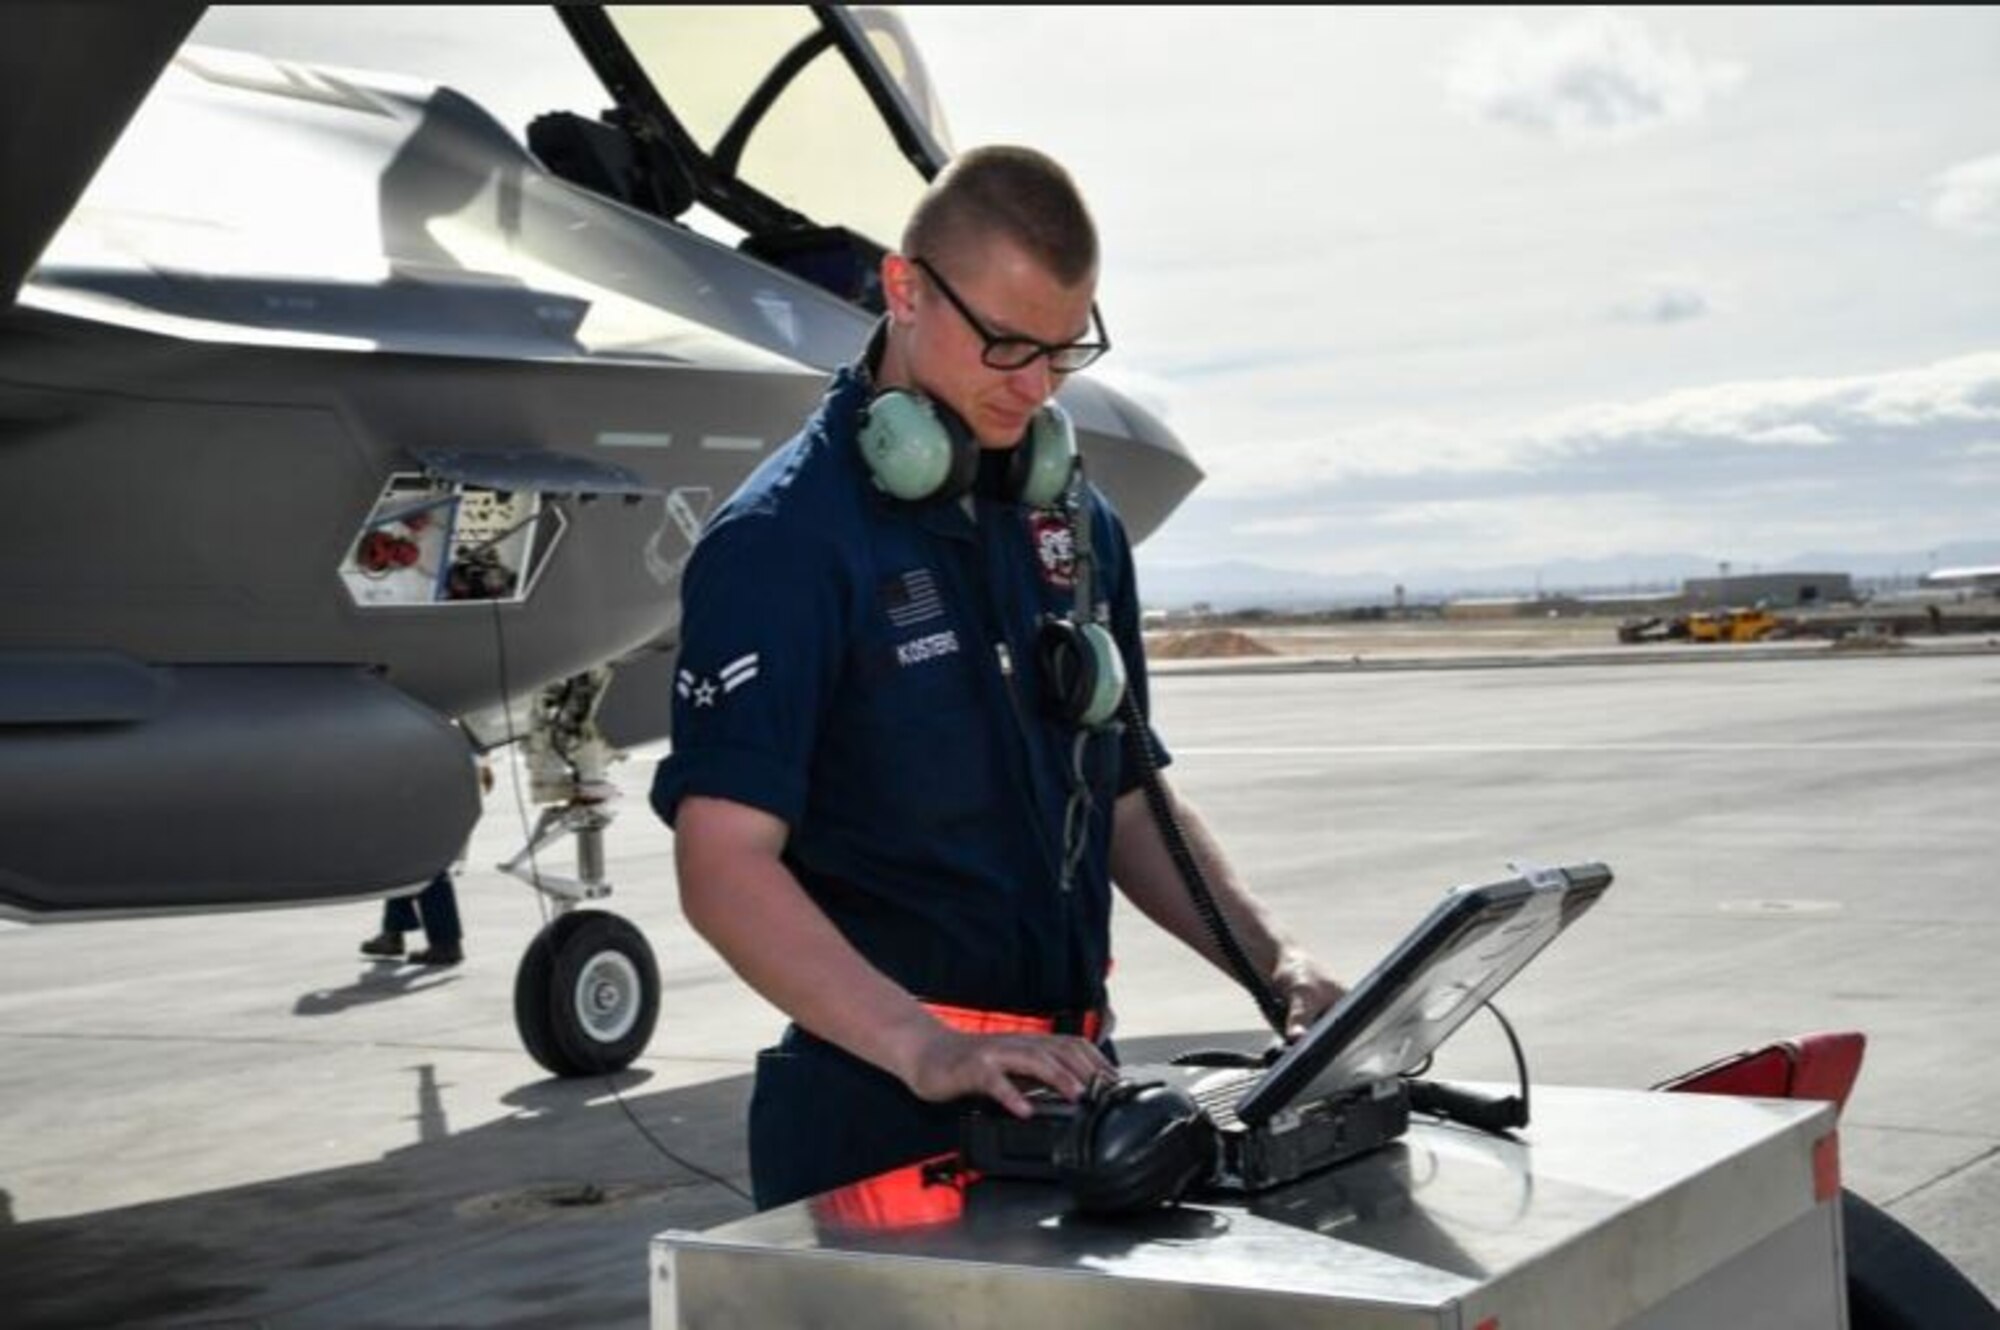 Airman 1st Class Nathan Kosters, a 34th Aircraft Maintenance Unit crew chief, checks computer data while preparing to launch an F-35A Lightning II during Red Flag 17-1 at Nellis Air Force Base, Nevada in Feb. 2017. In order to assist in providing training and best practices in the field of cyber security, the Cyber Resiliency Office for Weapons Systems released an updated version of the Department of the Air Force System Security Engineering Cyber Guidebook July 26th. (U.S. Air Force photo by R. Nial Bradshaw)